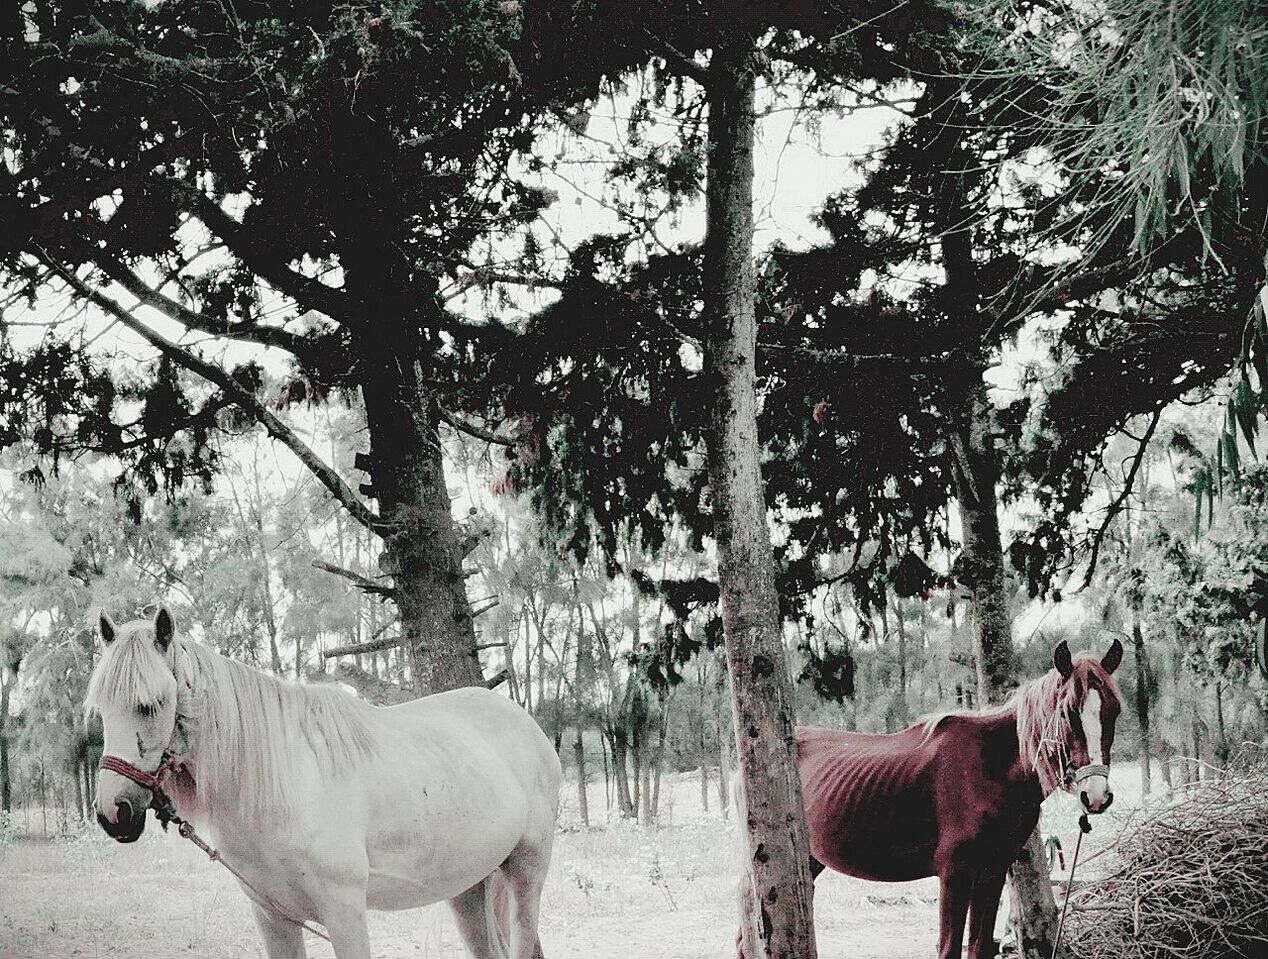 Horses tied to tree trunk in field